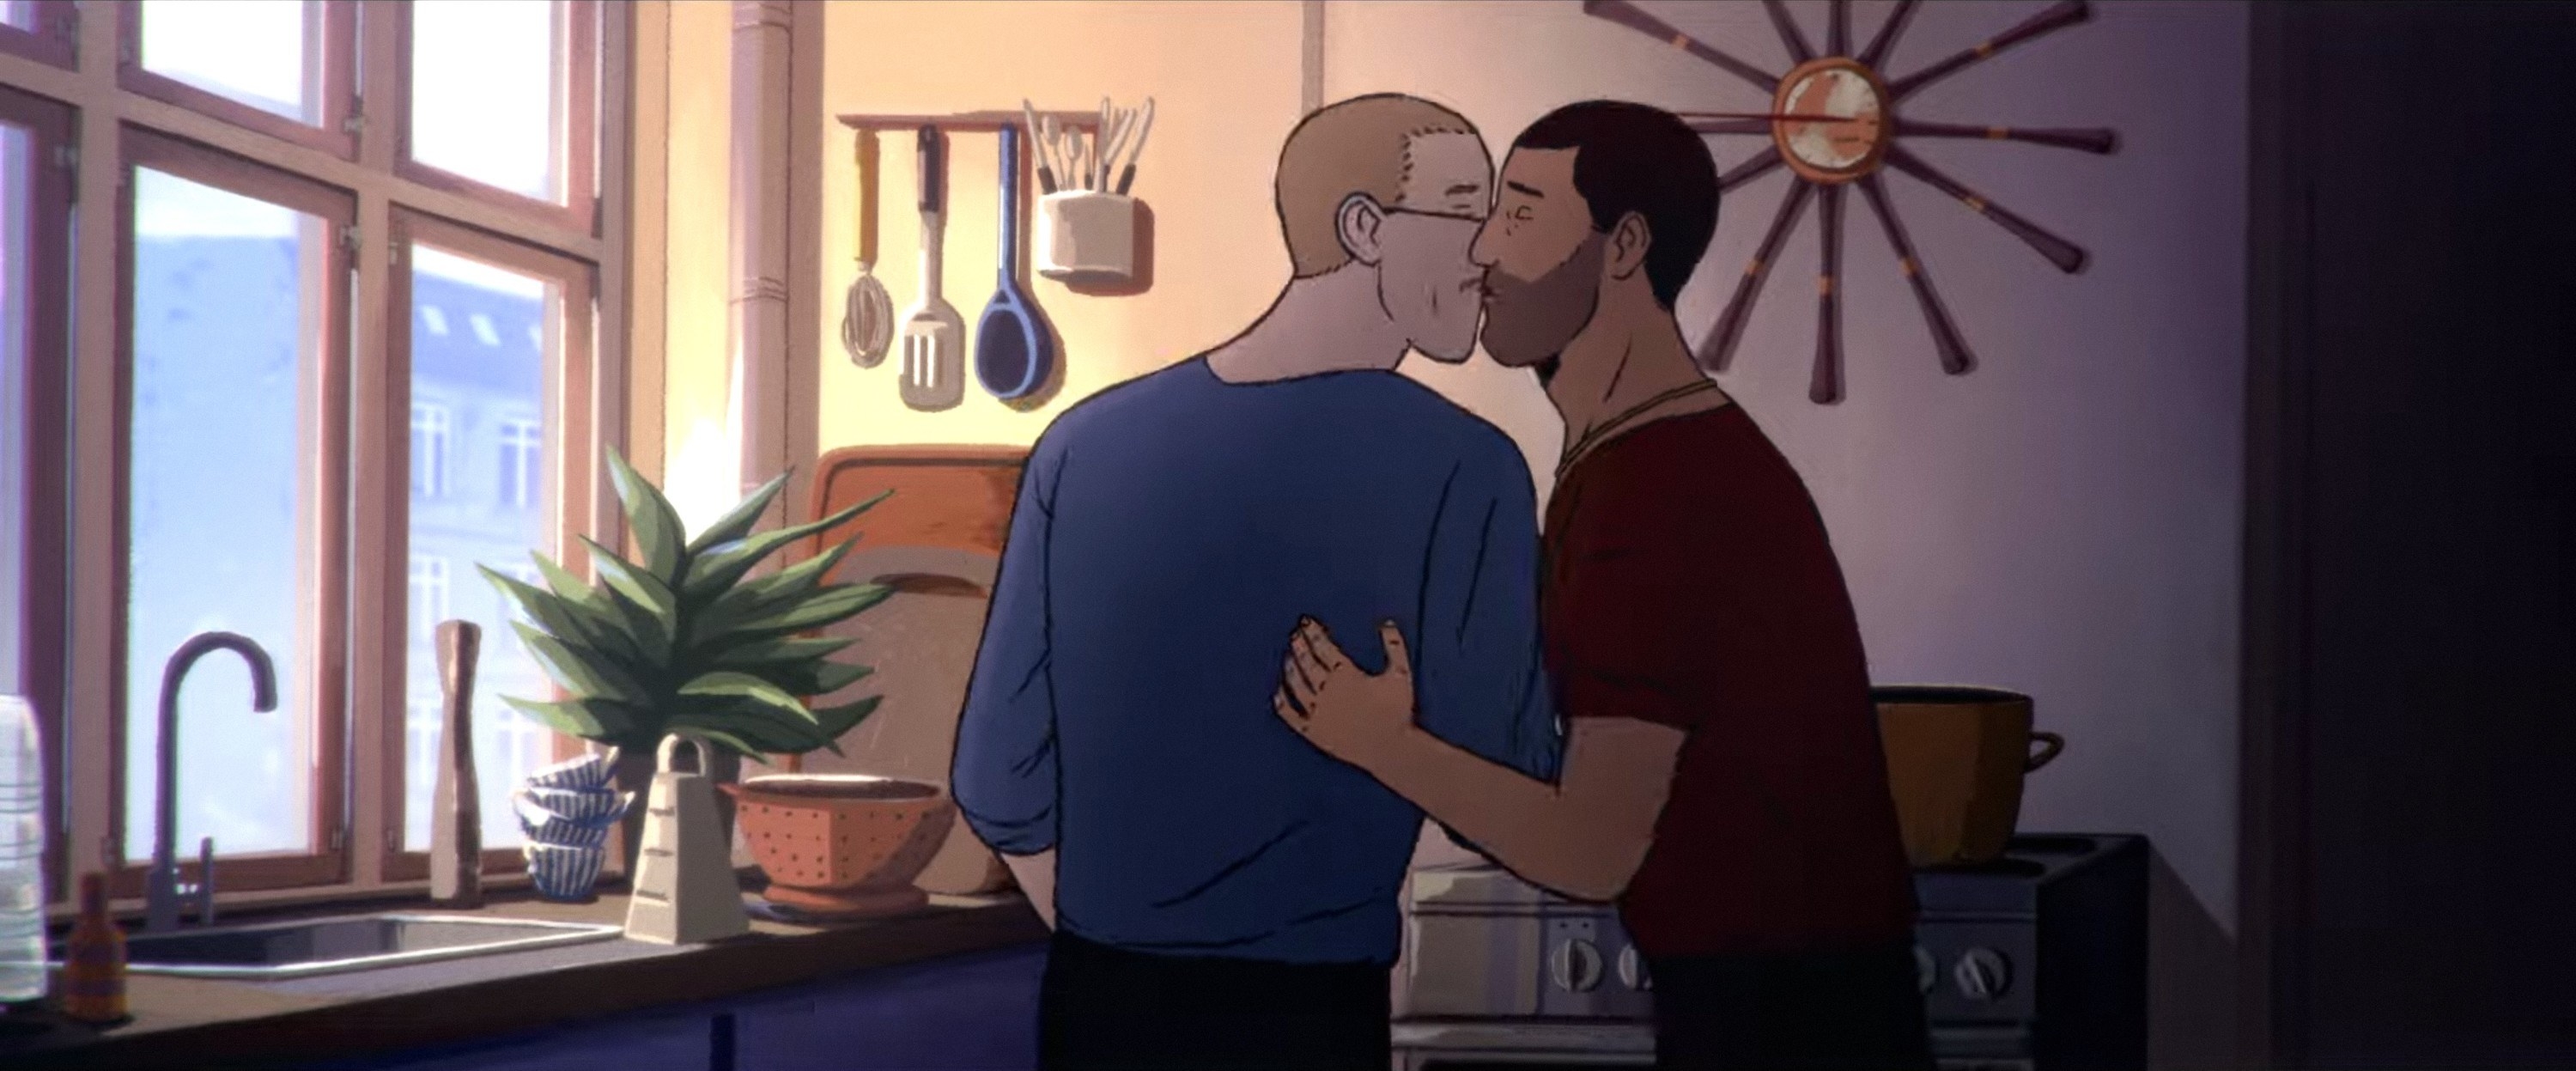 Two men kiss in a kitchen